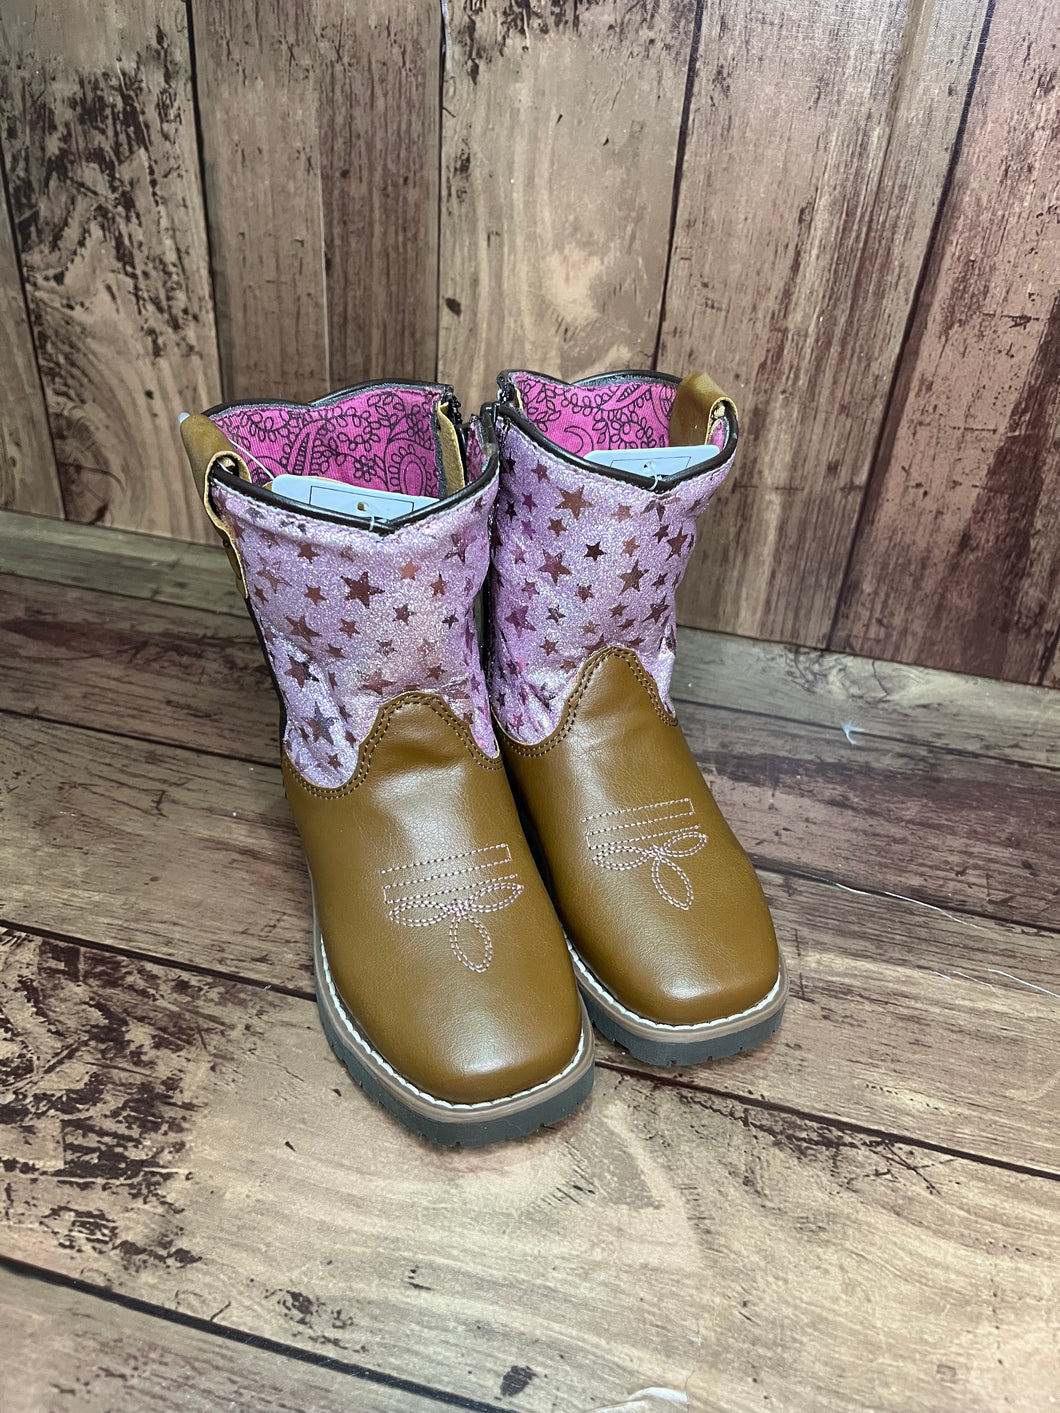 Smoky Mountain Boots 3228T Autry Brown/Pink Western Toddler Boots